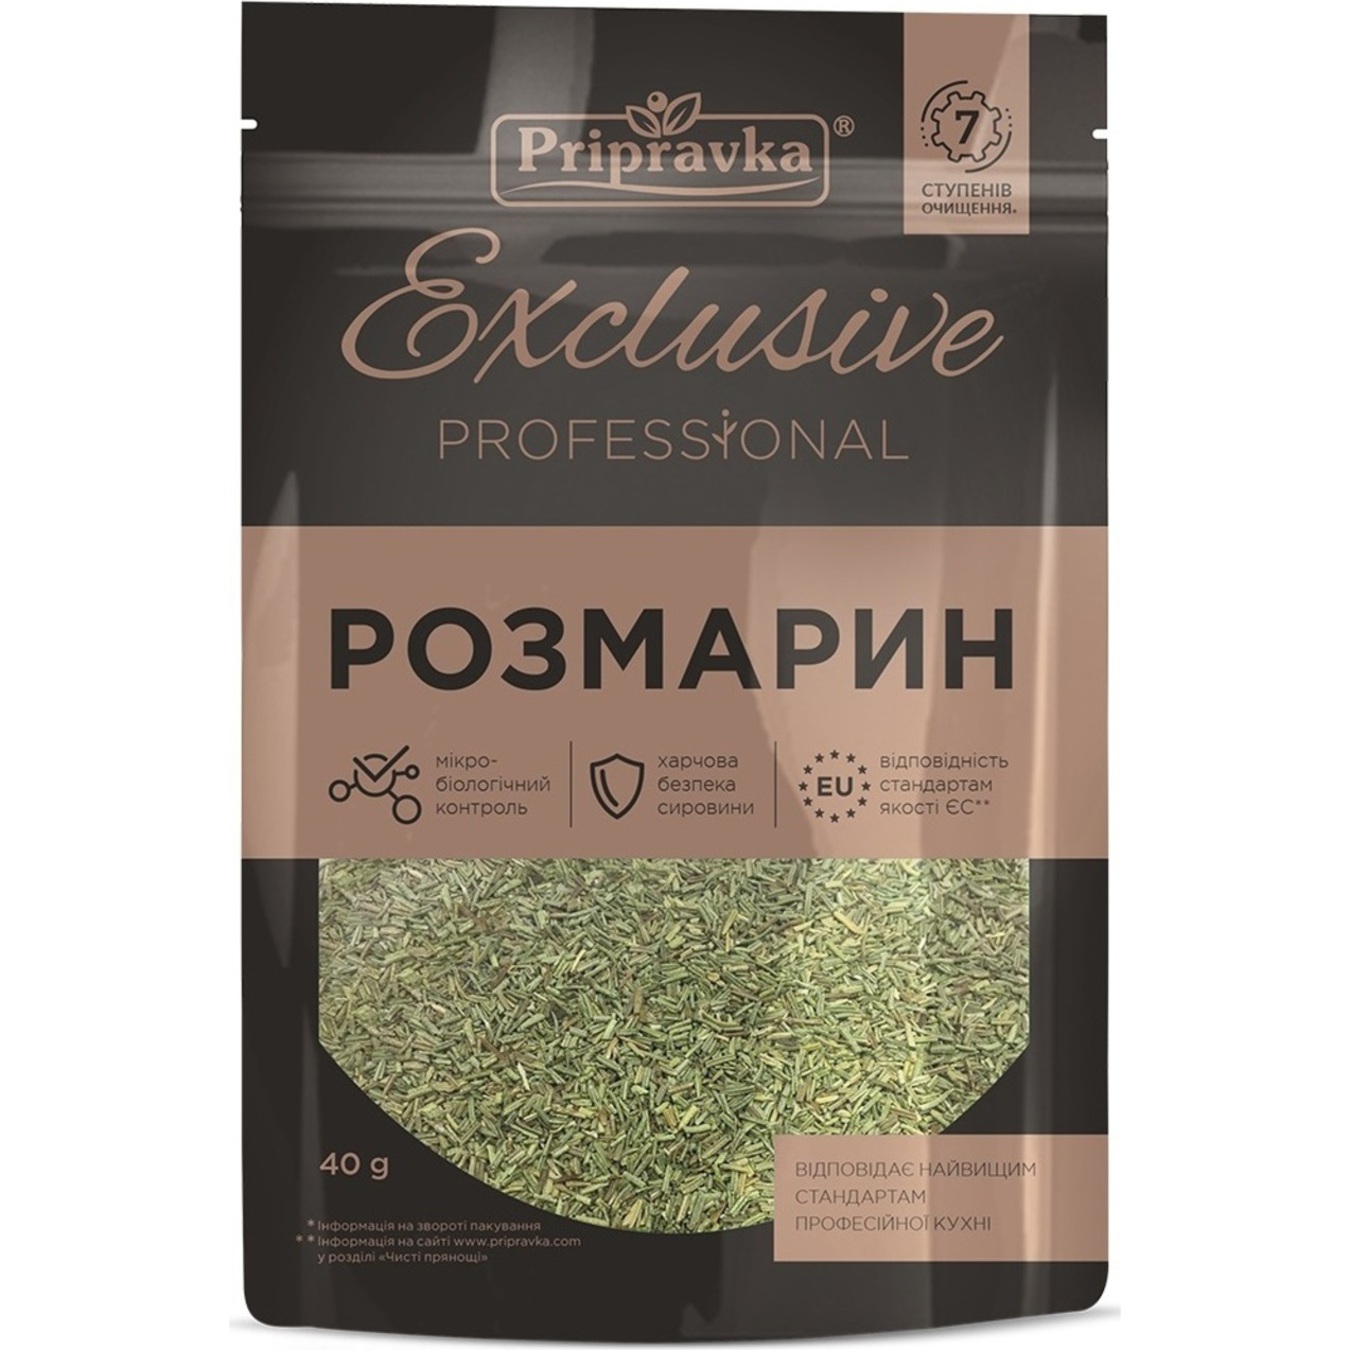 Pripravka Exclusive Professional rosemary spices 40g